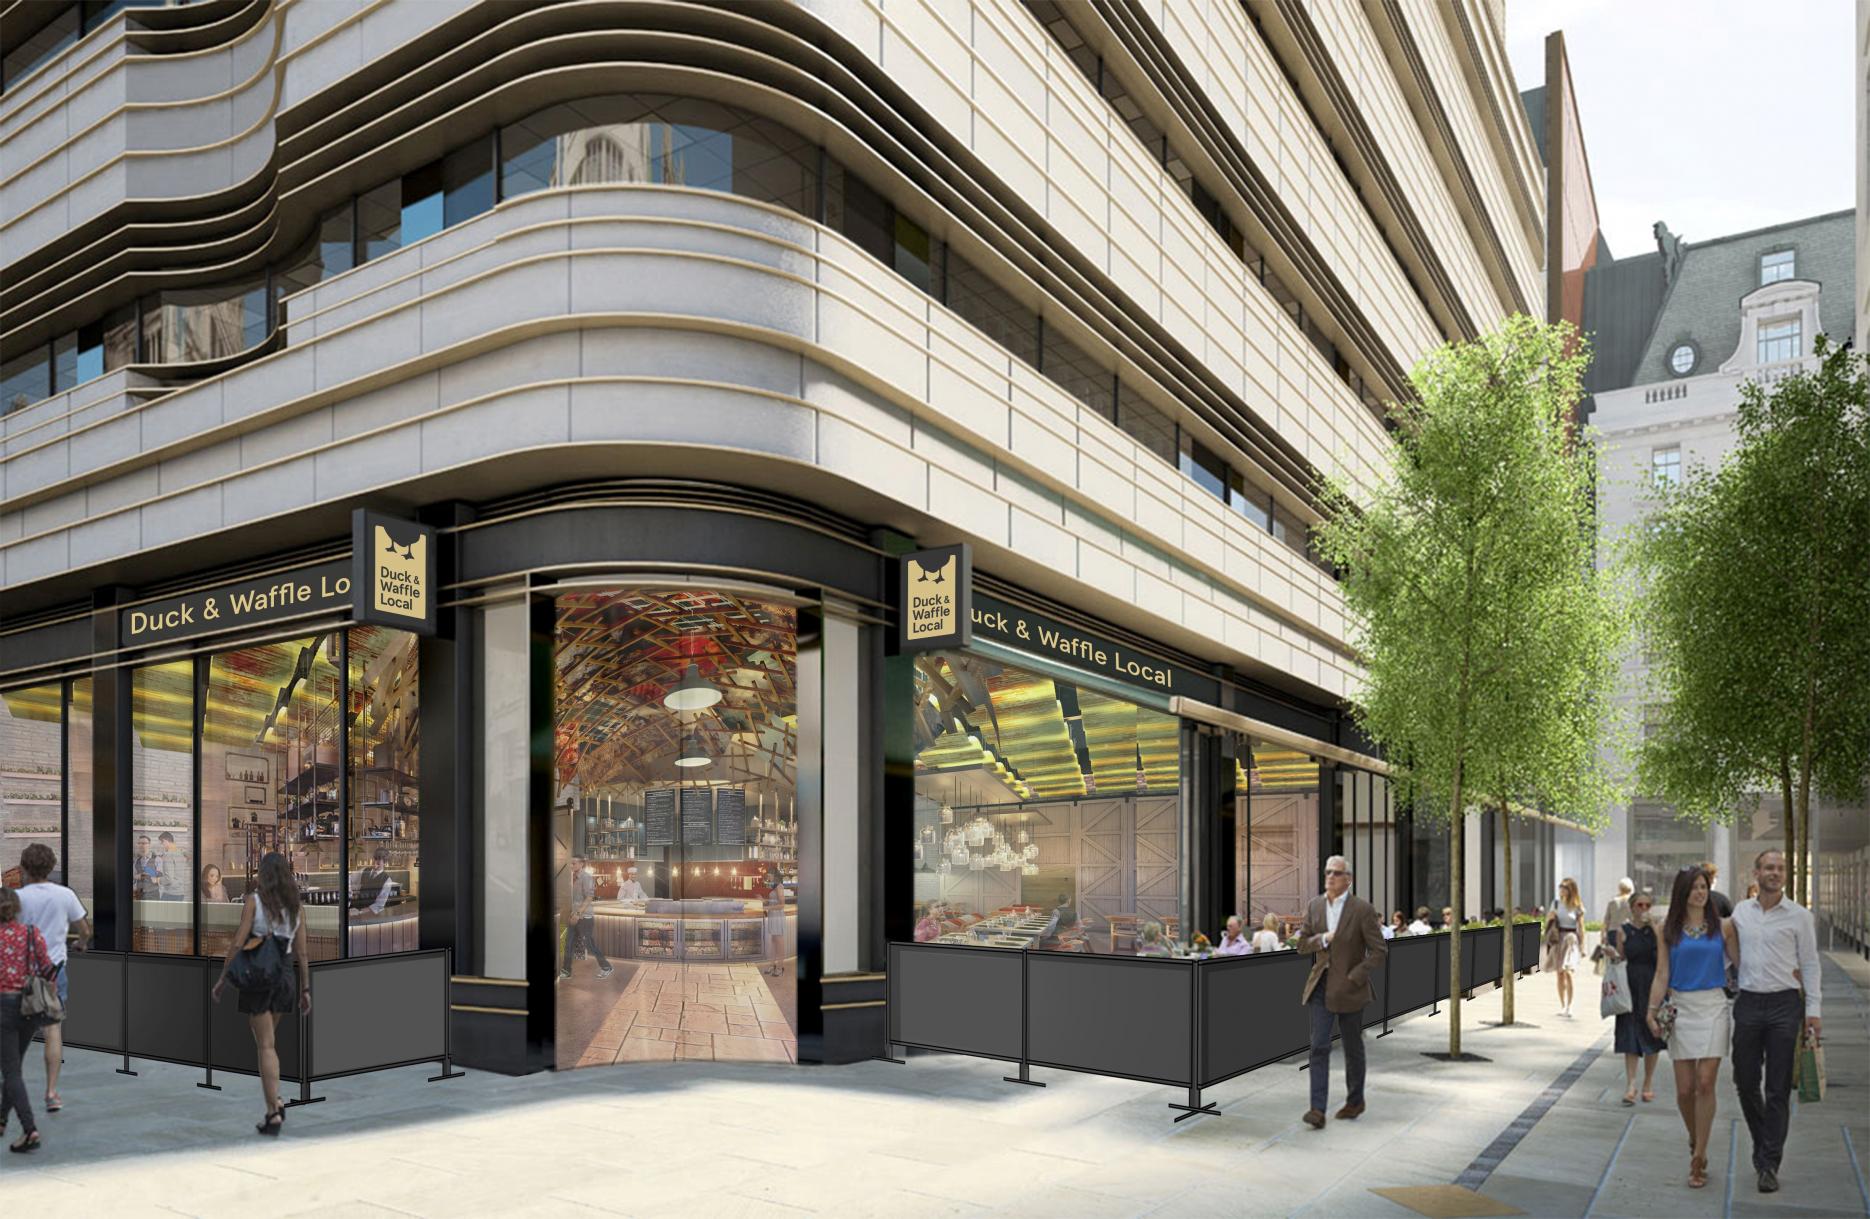 Duck & Waffle team to launch fast casual concept